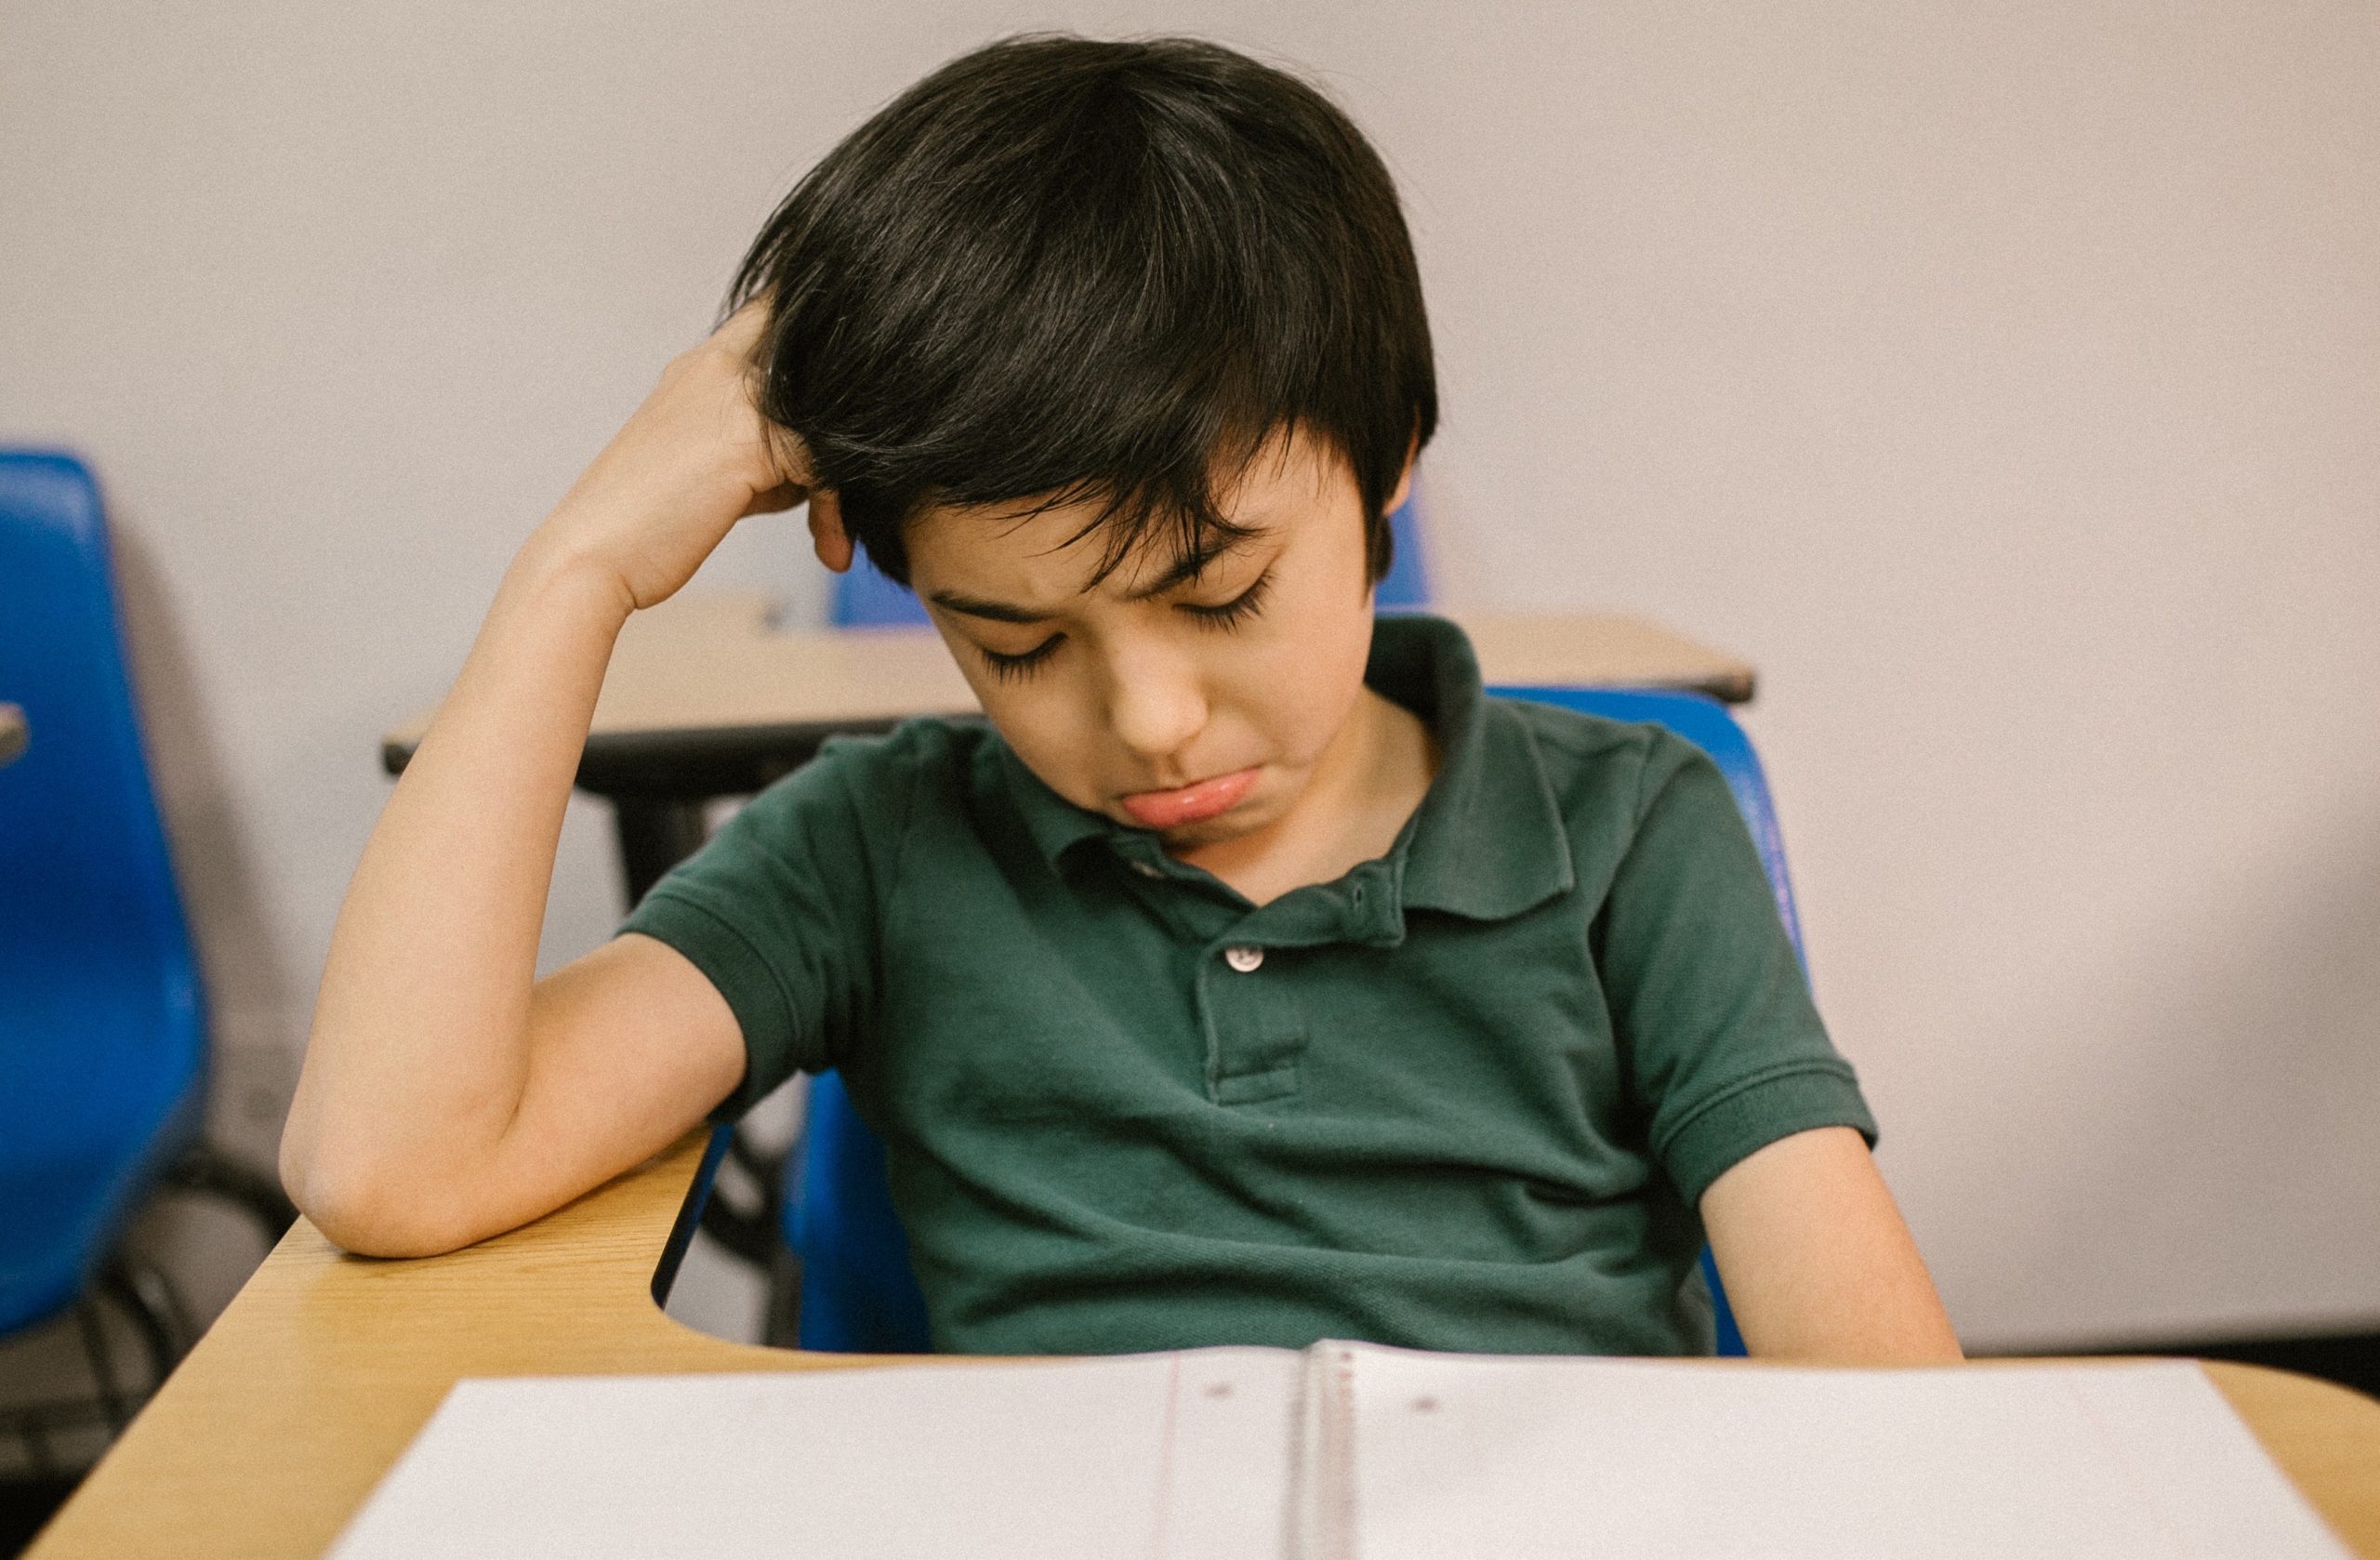 Reading difficulties make learning hard for young student.